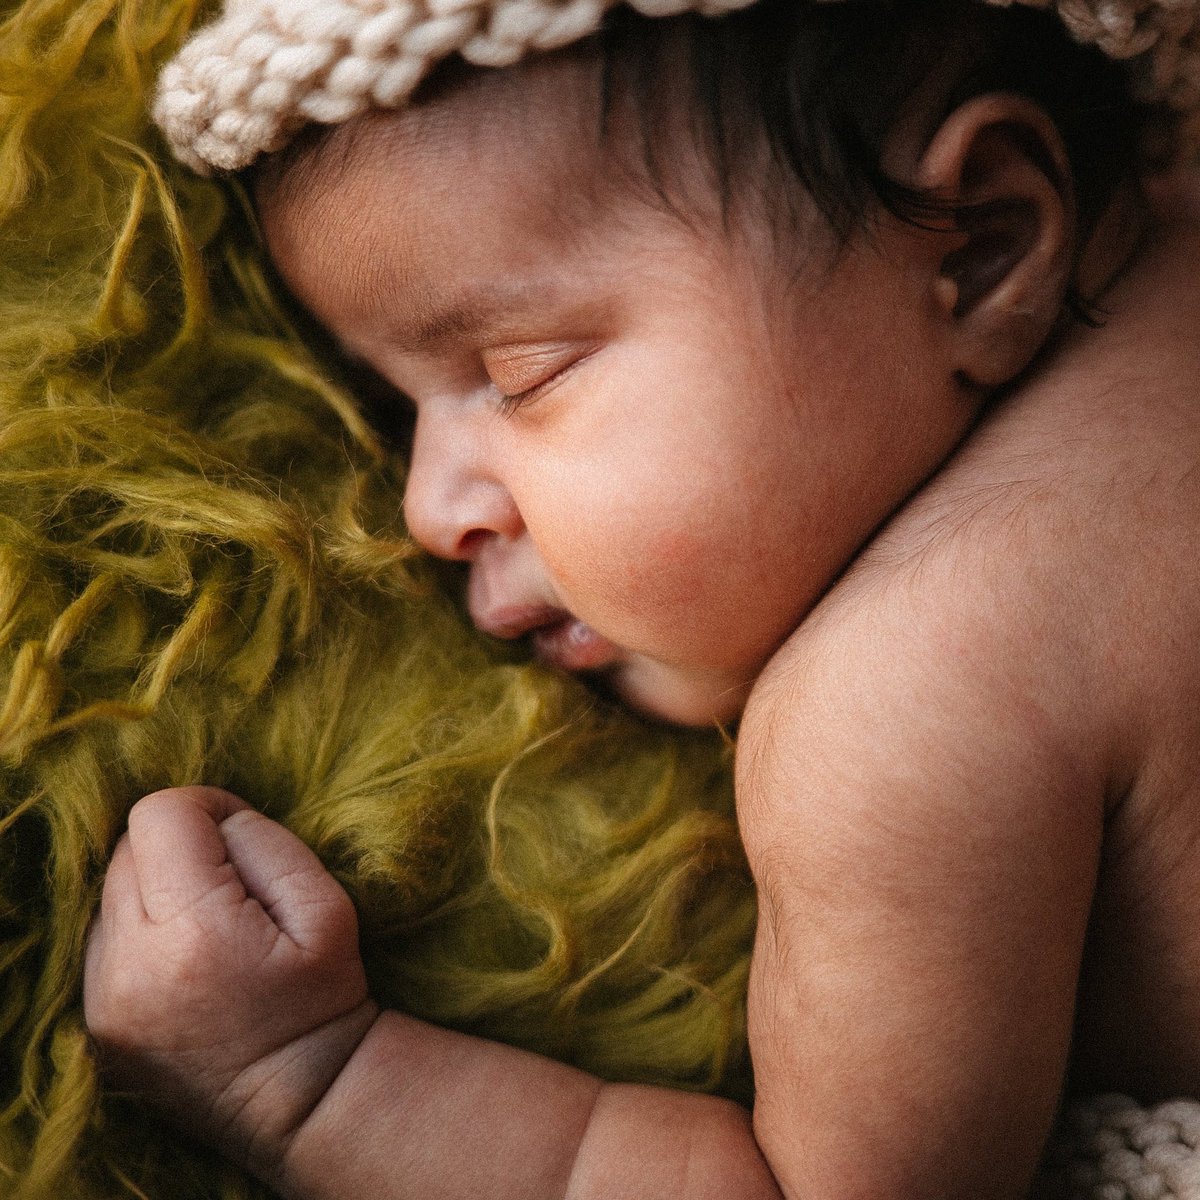 Babies sleep up to 16 hours a day.
#rest #babybedtime #babysleep